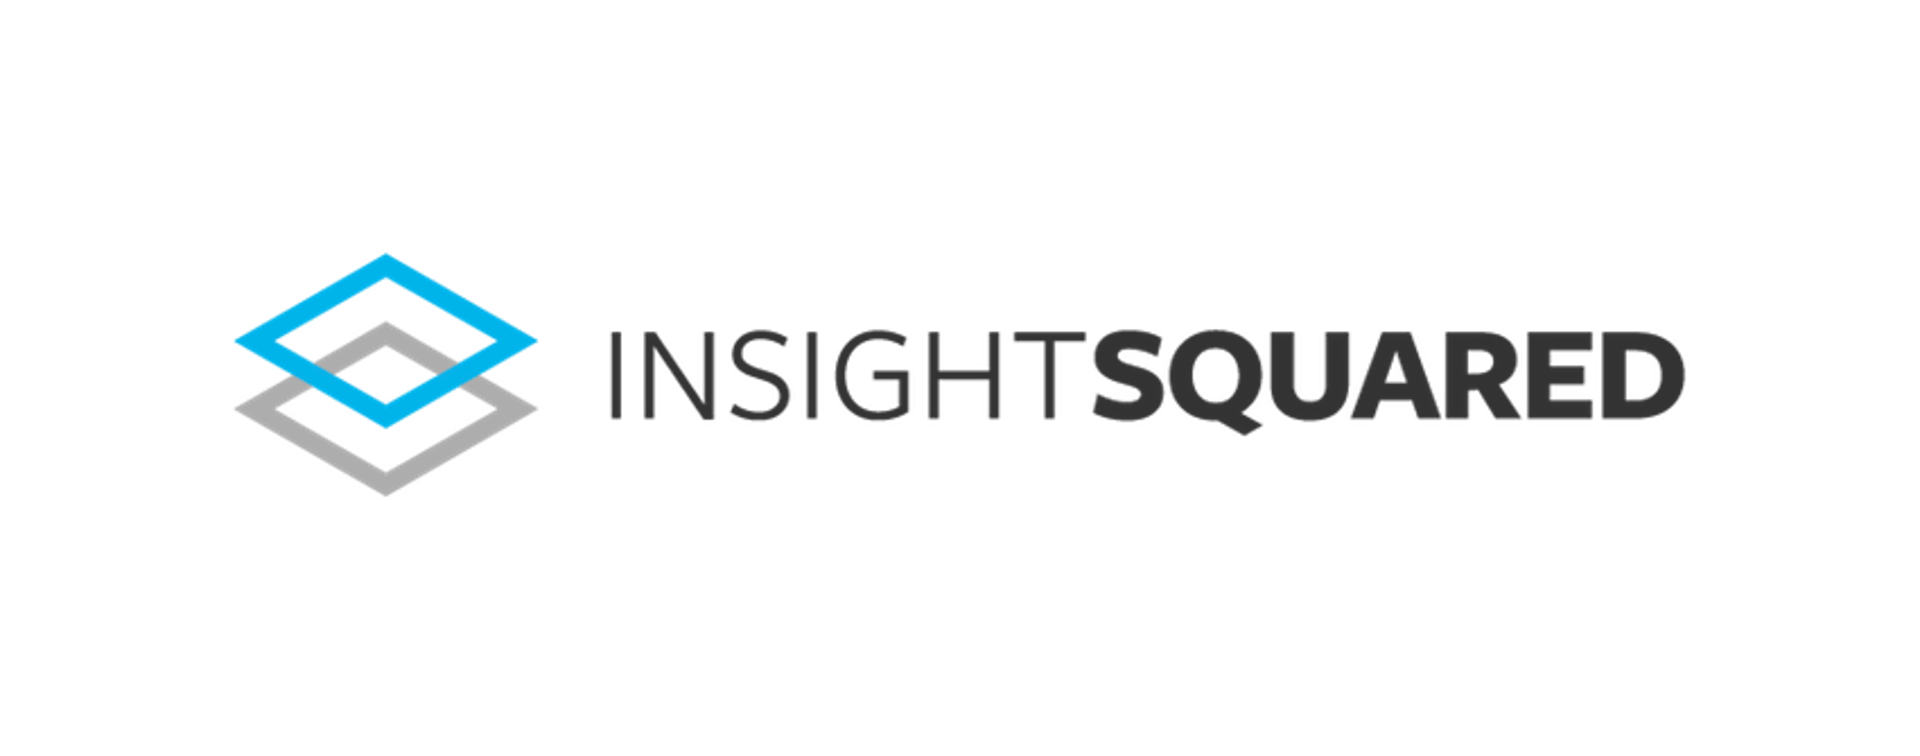 Insightsquared Salesforce